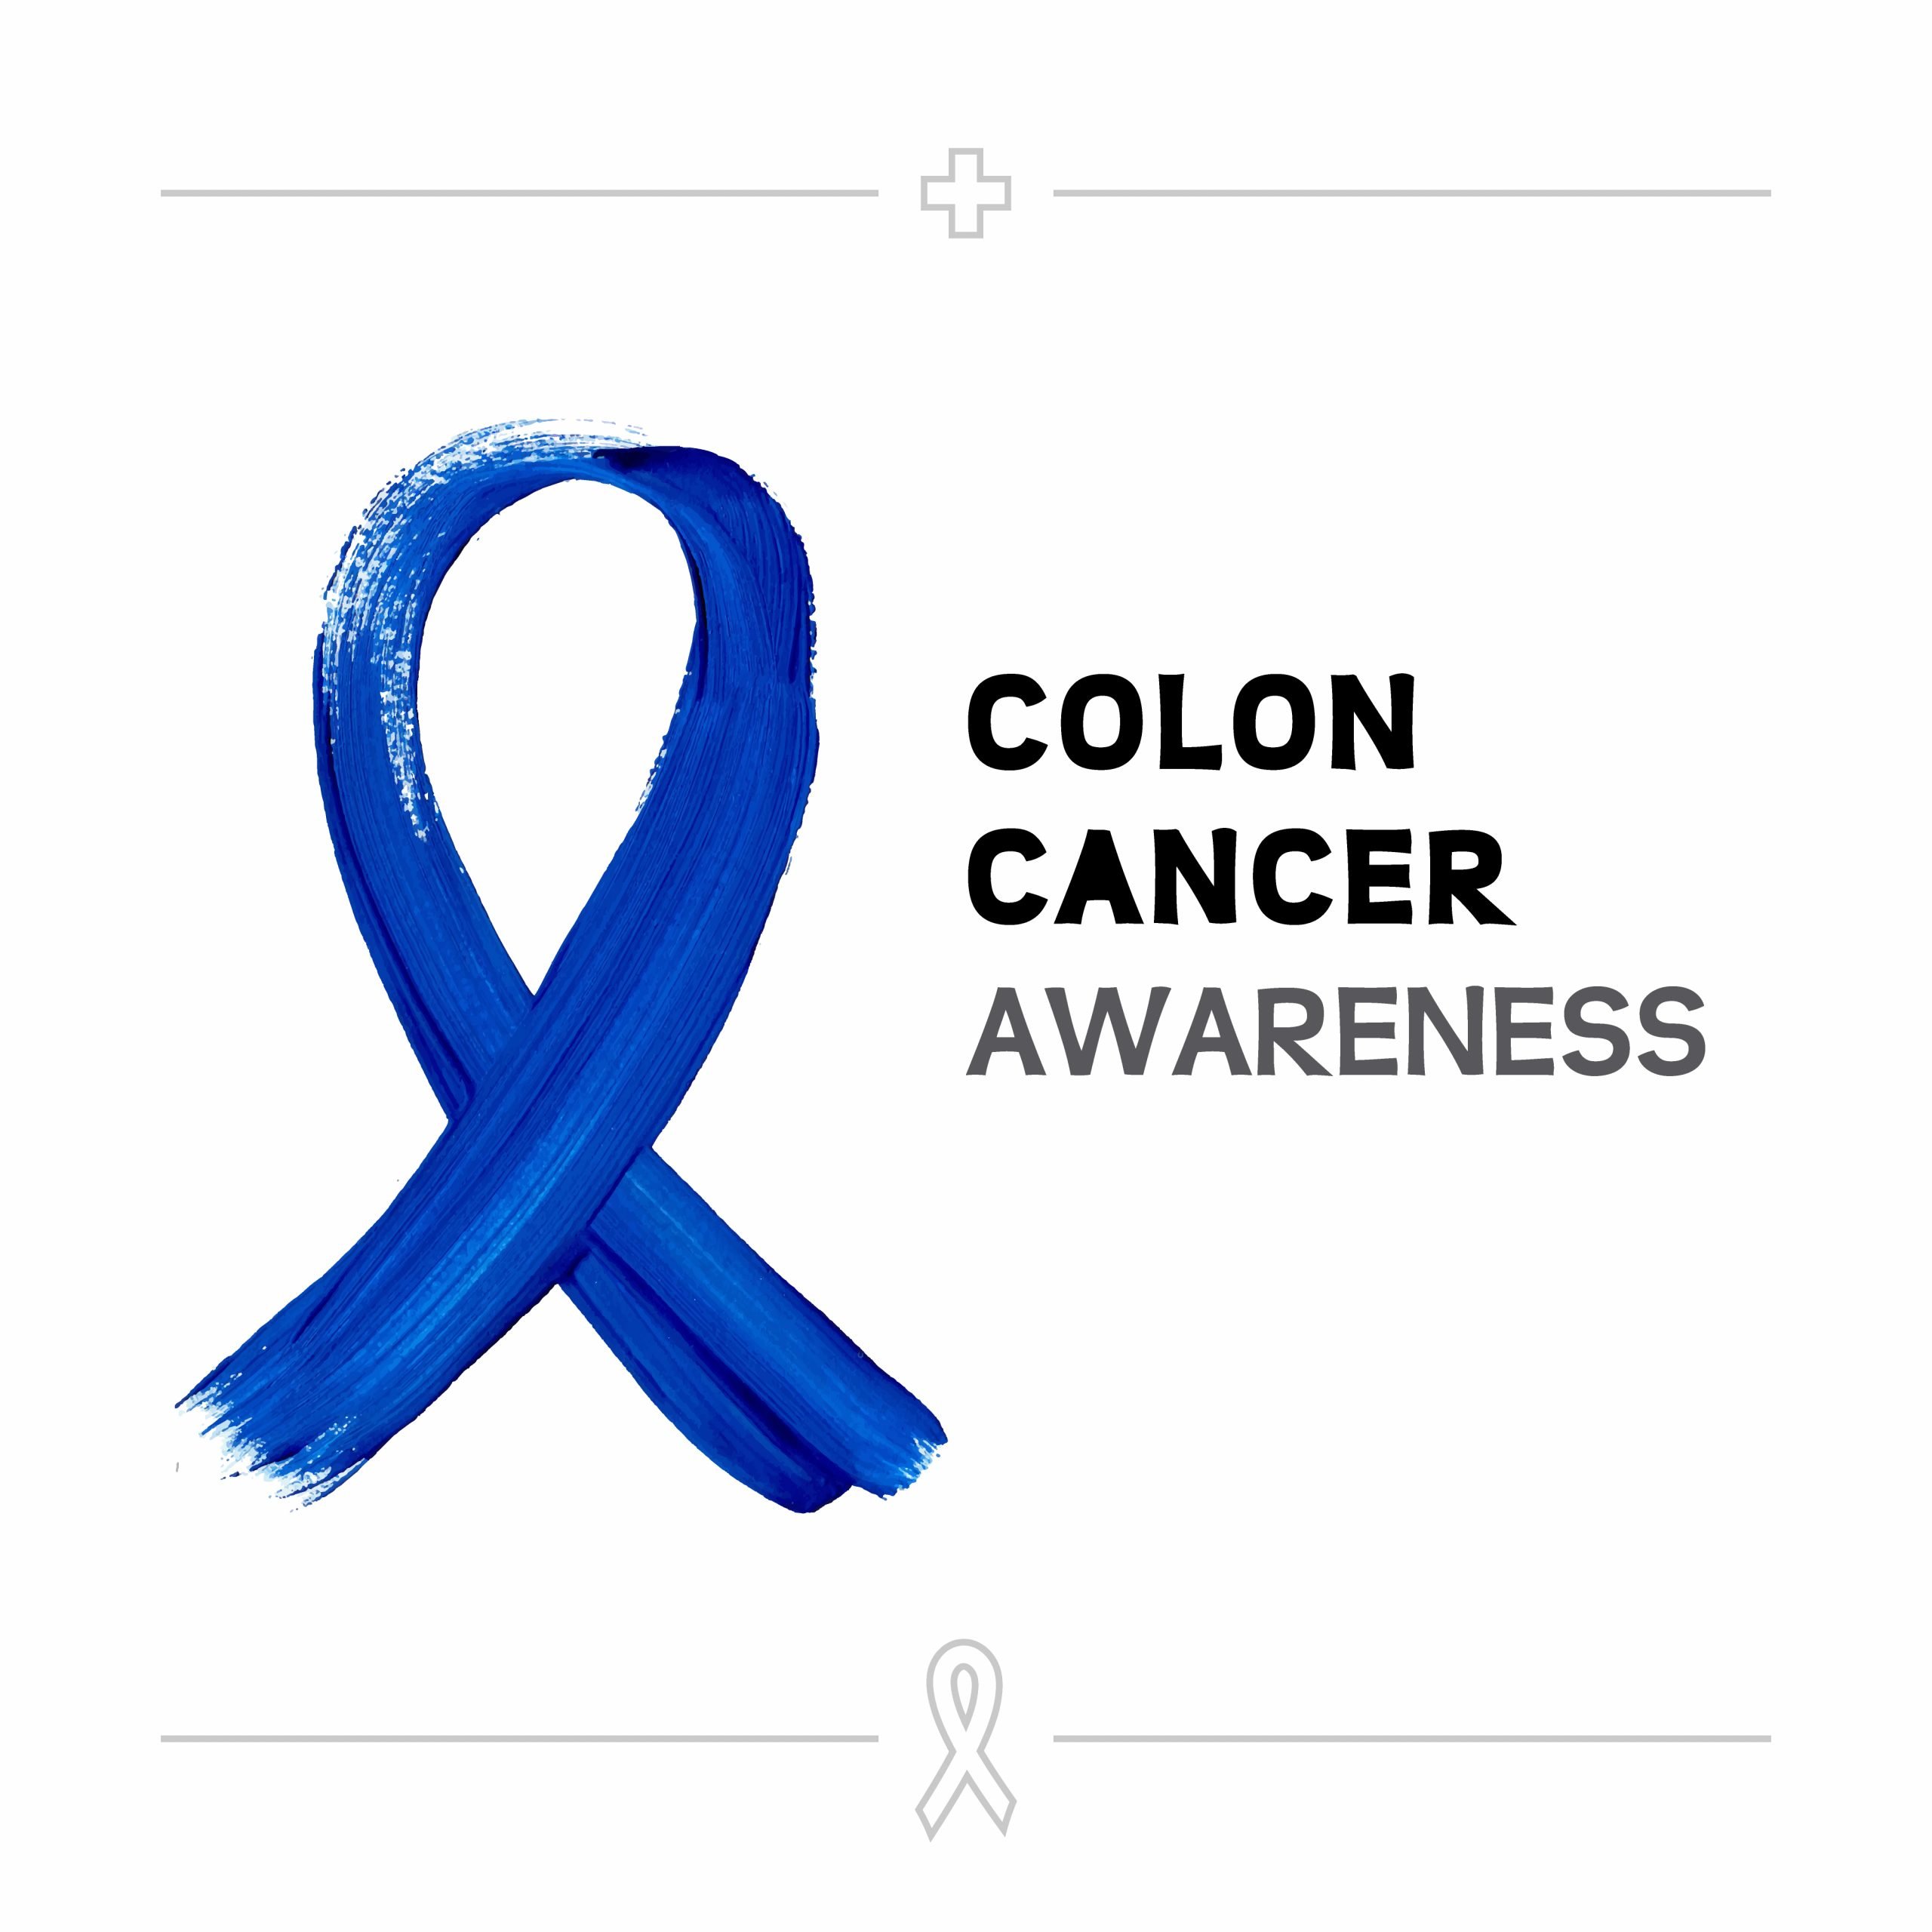 Five Key Facts to Know About Colorectal Cancer